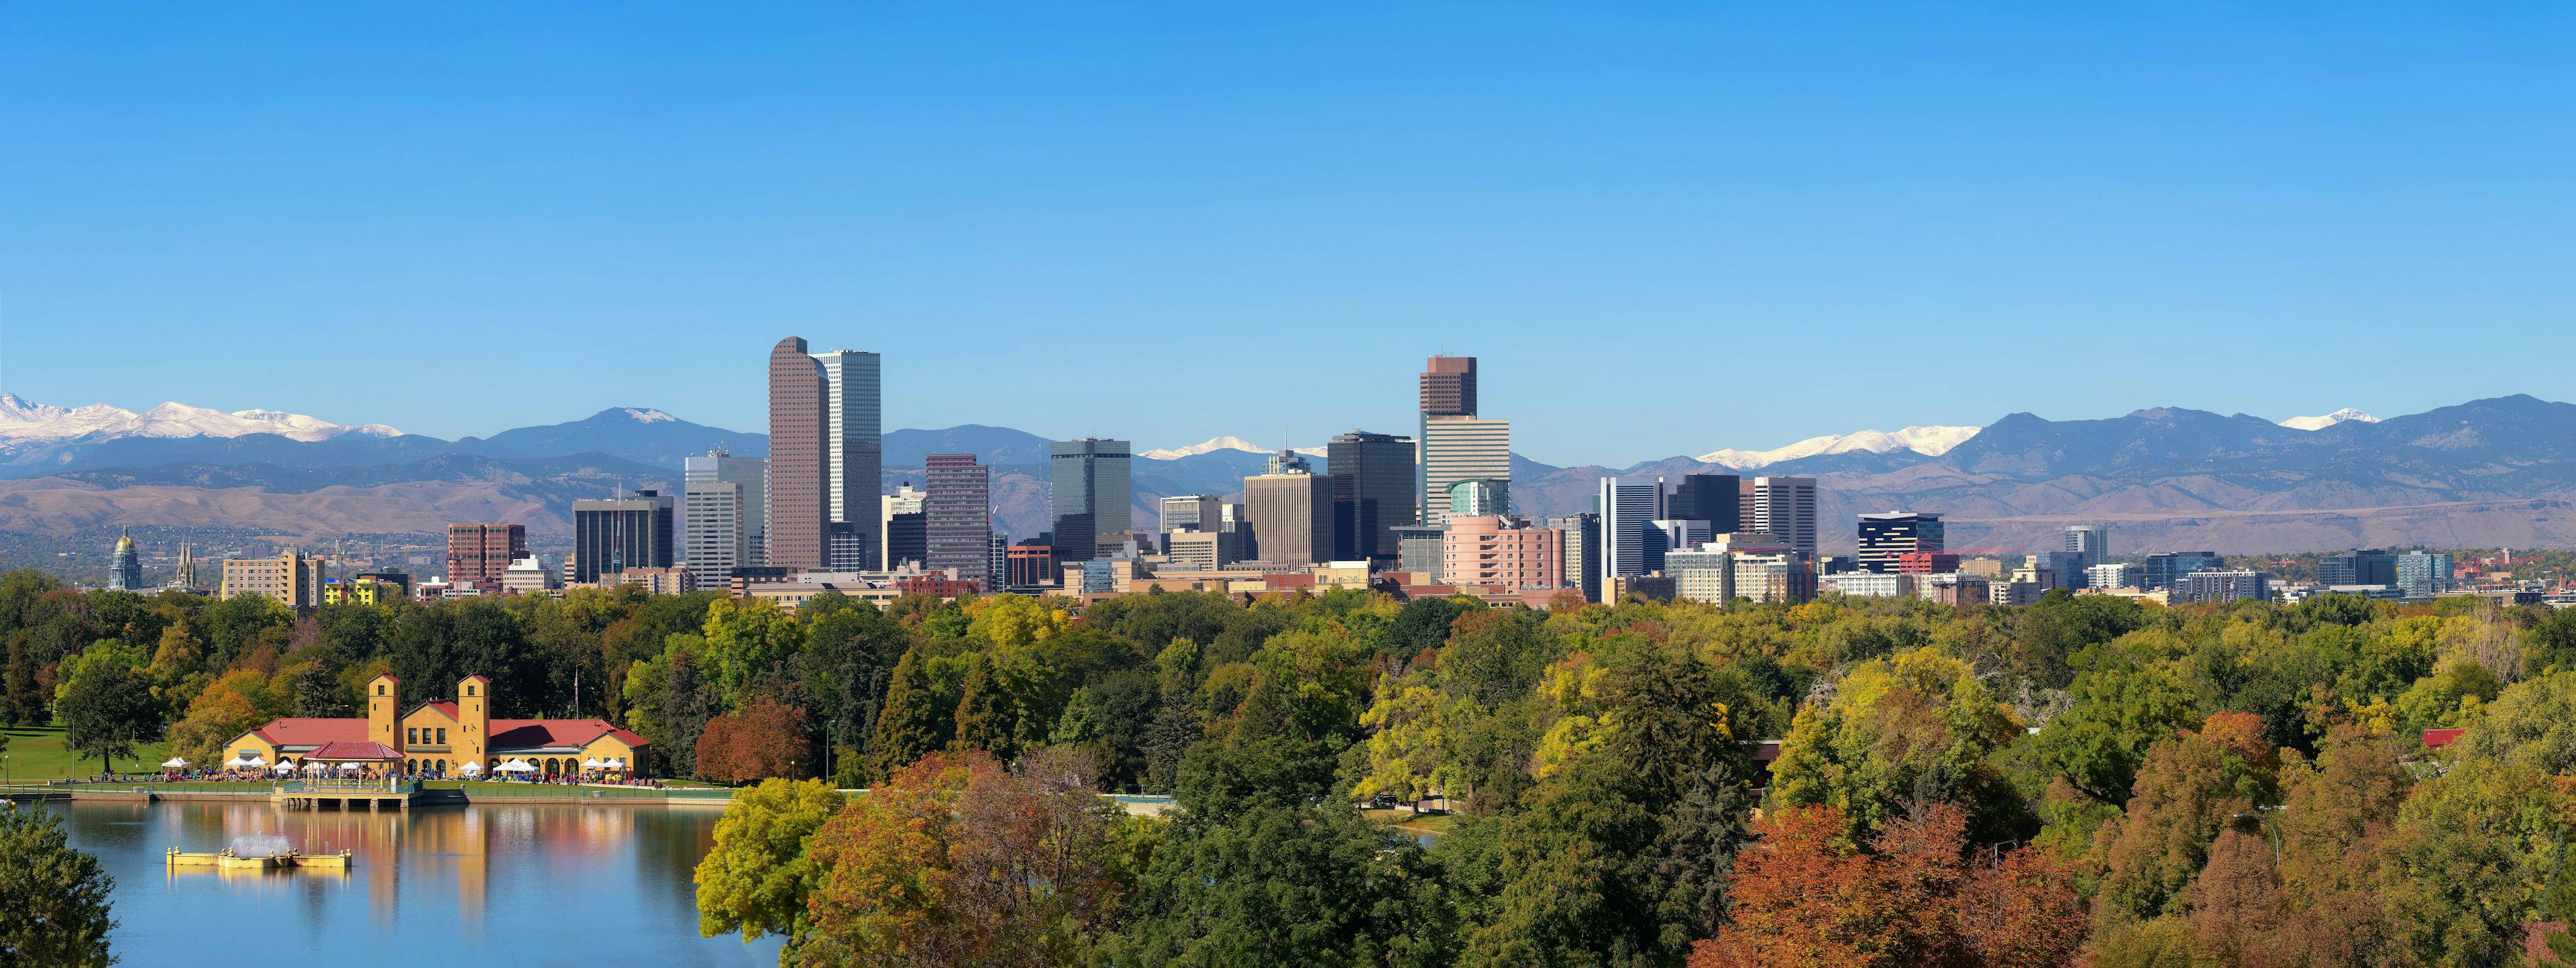 Skyline of Denver downtown with Rocky Mountains | Image Credit: © Nick Fox - stock.adobe.com